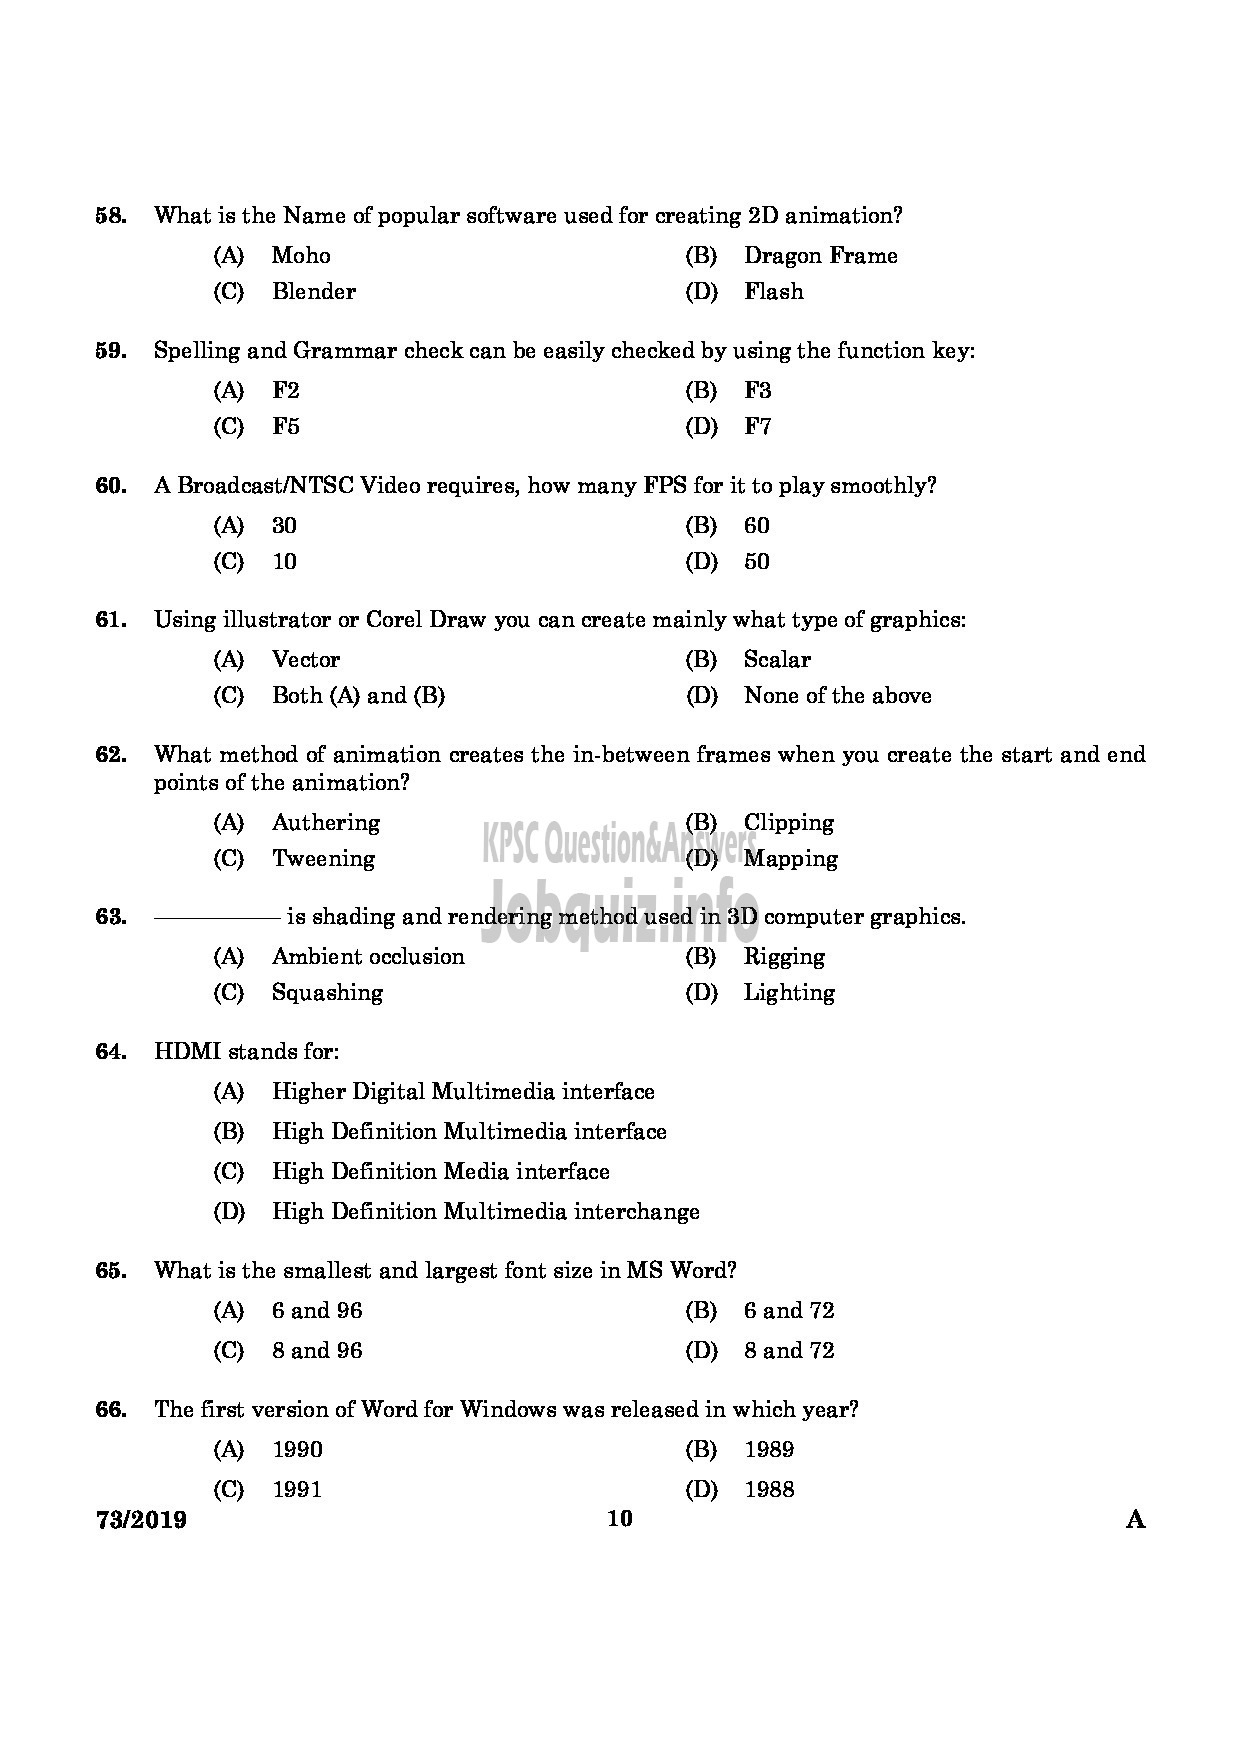 Kerala PSC Question Paper - Junior Instructor (Multimedia Animation And Special Effects) In Industrial Deve Dept English -8